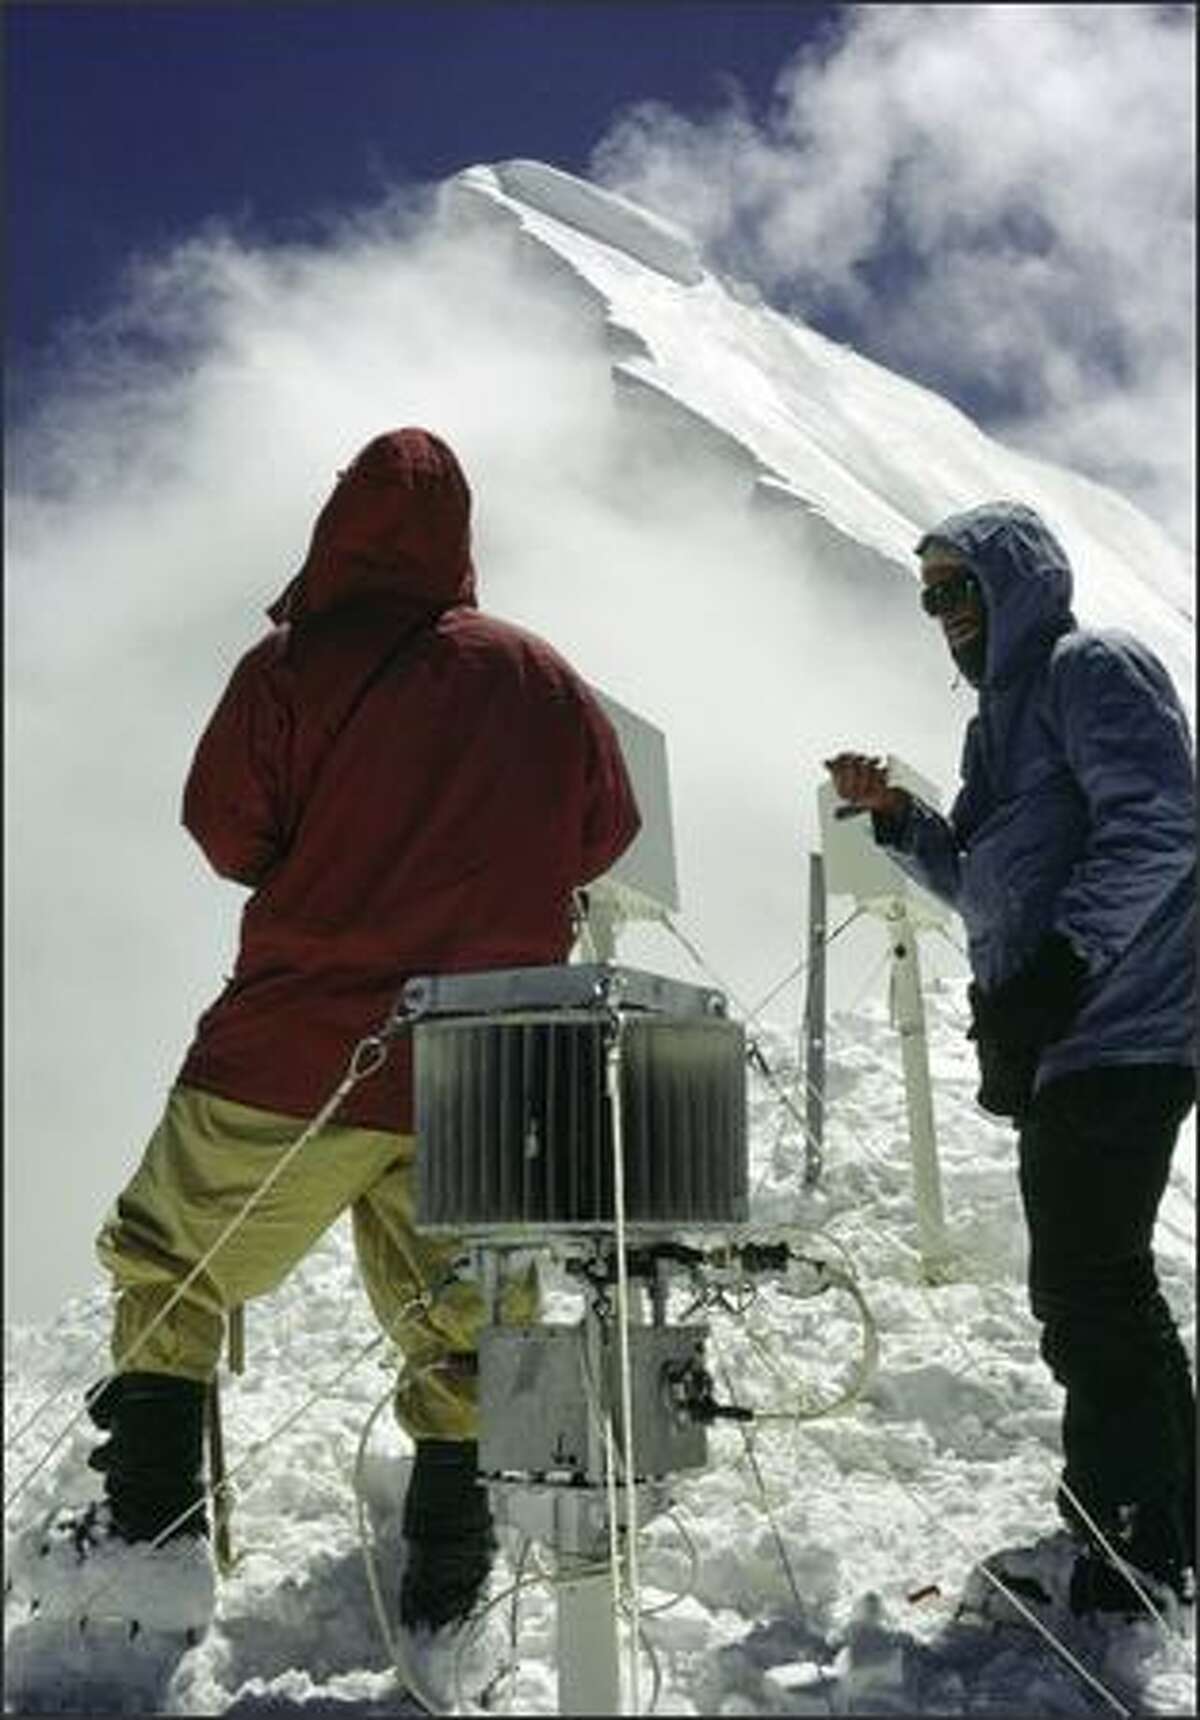 After numerous searches were unable to locate the lost device on Nanda Devi, Robert Schaller climbed in the Himalayas again to install a similar device on the neighboring peak of Nanda Kot. The device, like the lost one, contains plutonium fuel cells to power its transceiver.